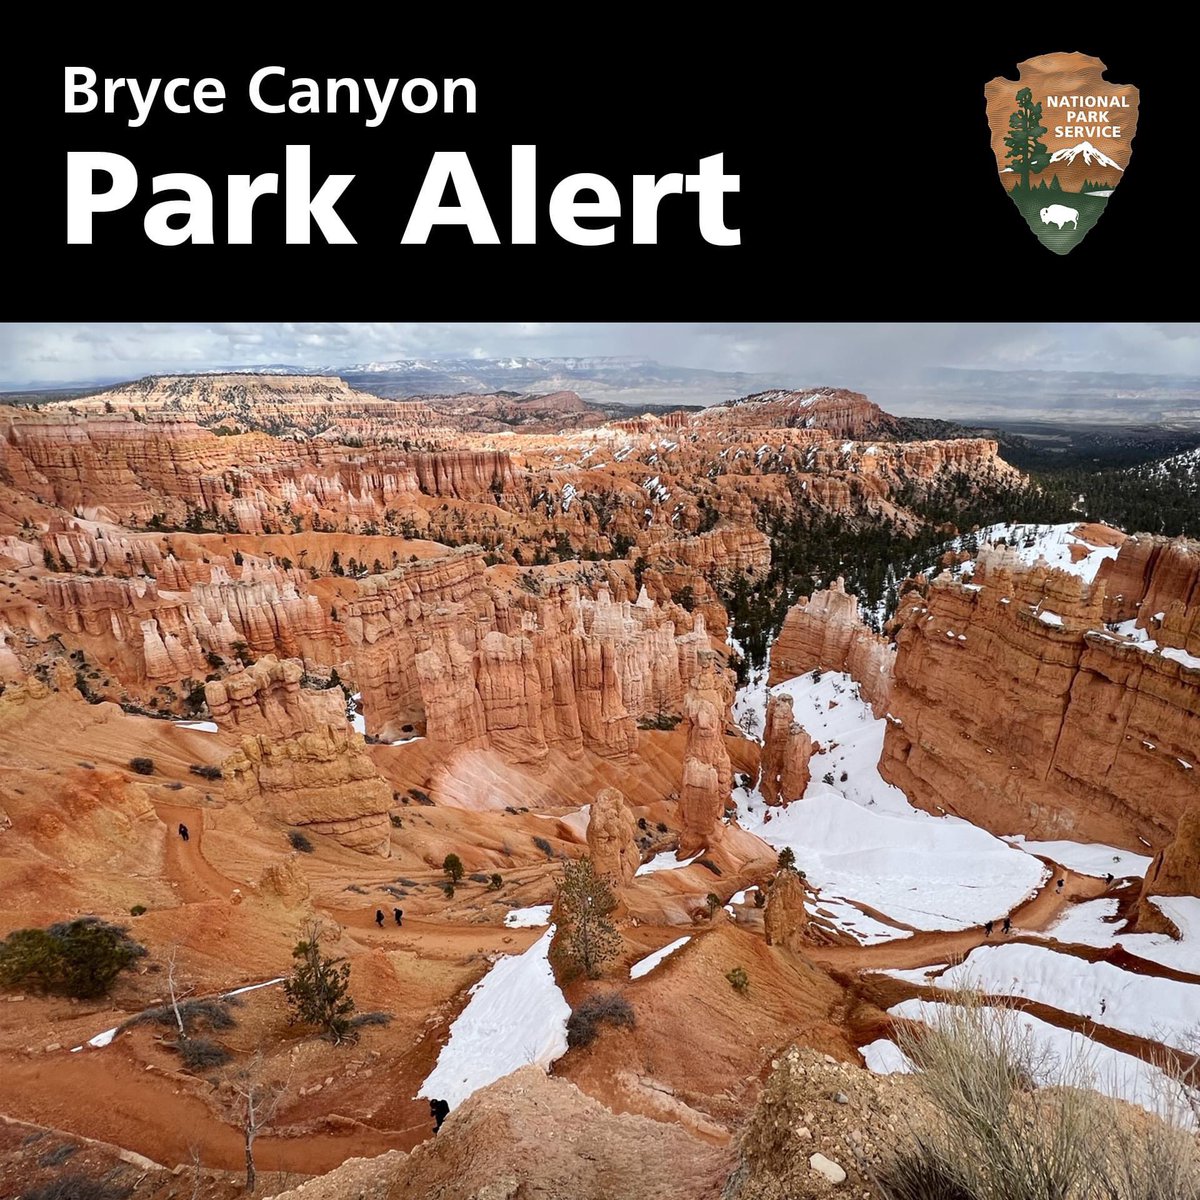 ✅ The road to Paria View is now open to vehicles, which means all park roads are currently open for the season! 🚗 Roads are clear for all vehicles. 🥾 All unpaved trails are currently very muddy, with patches of ice and snow in shaded areas. go.nps.gov/BryceConditions